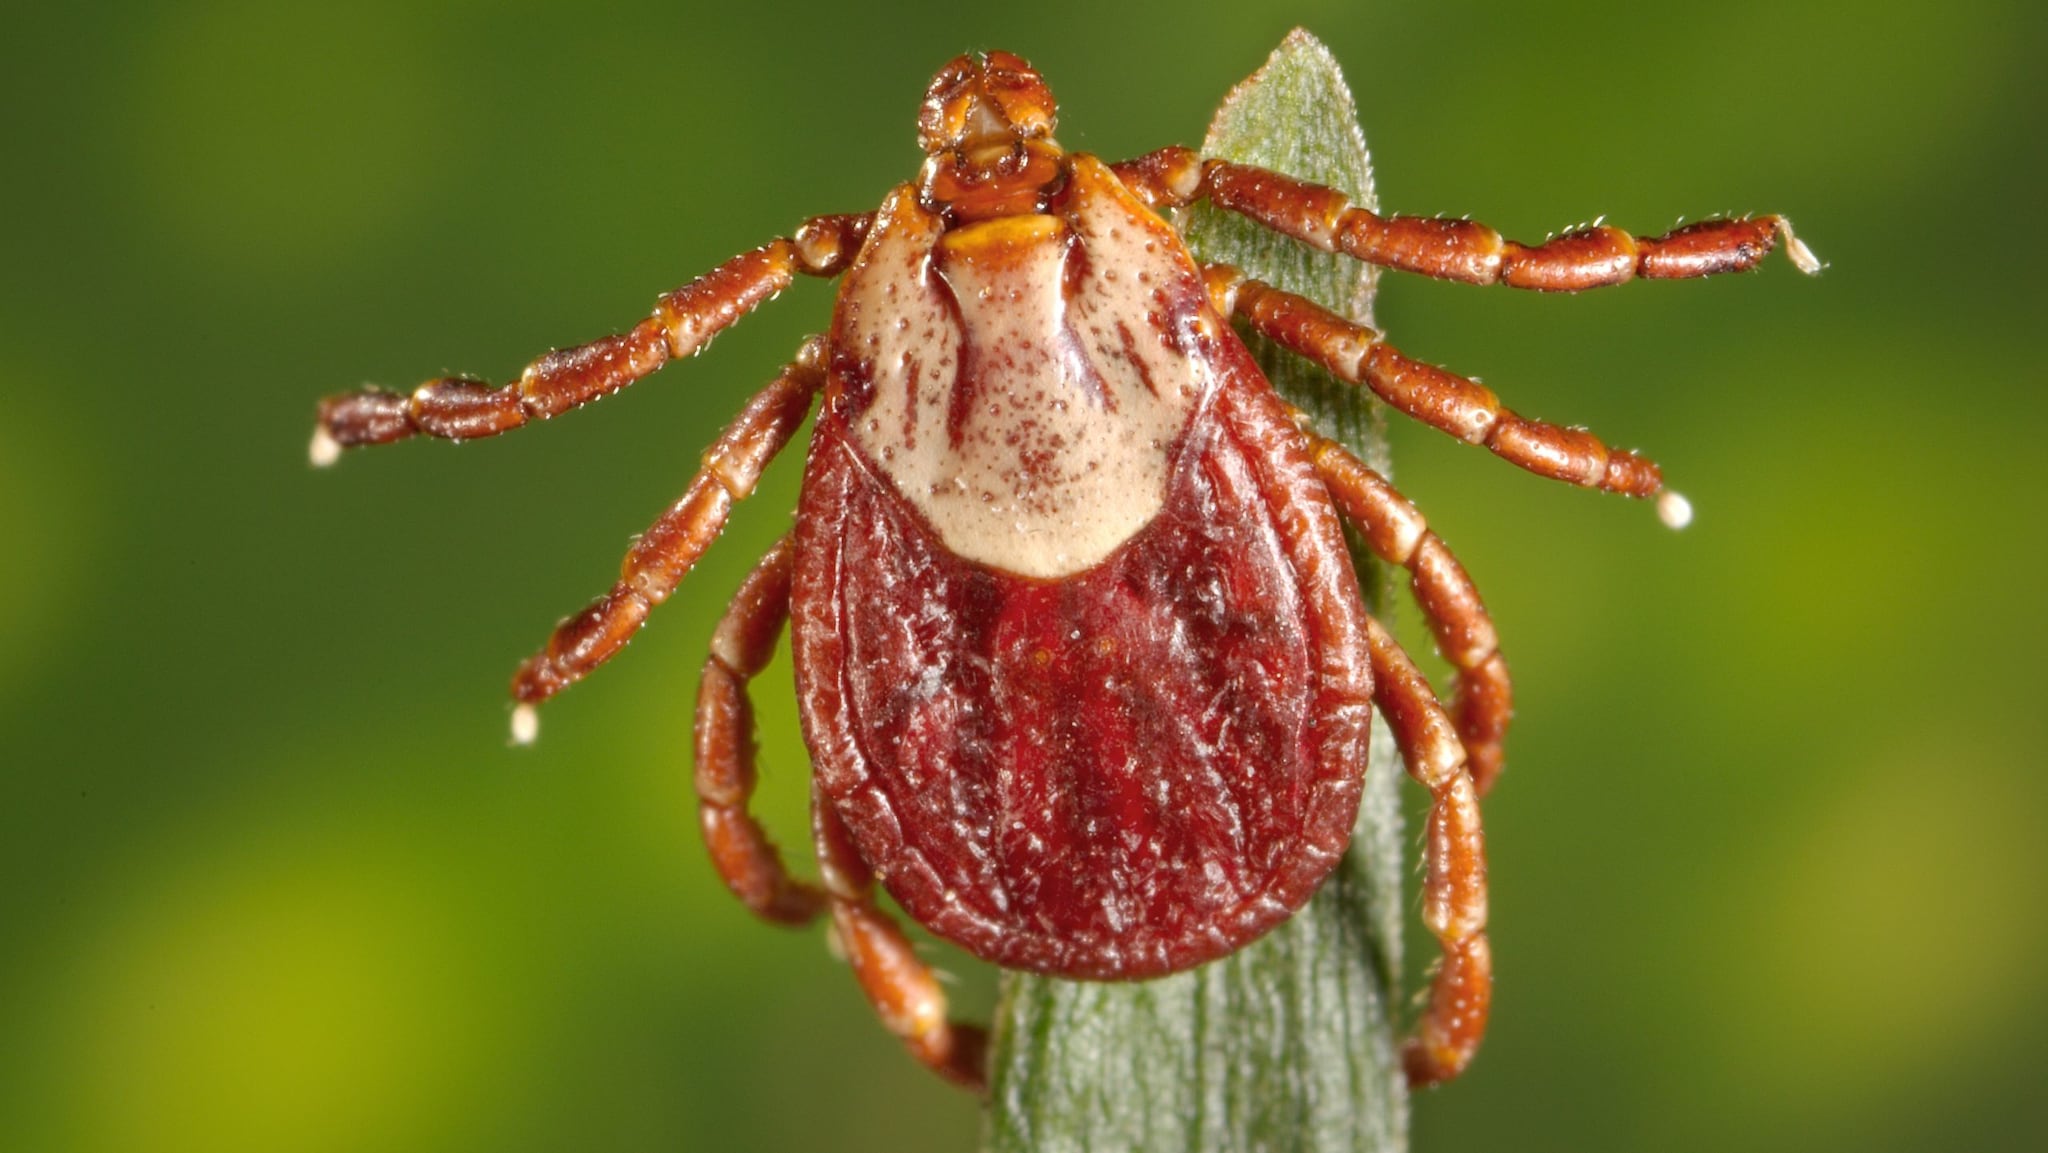 This photograph depicts a dorsal view of a female Rocky Mountain wood tick, Dermacentor andersoni. This tick species is a known North American vector of Rickettsia rickettsii, which is the etiologic agent of Rocky Mountain spotted fever (RMSF). See PHIL 10869, for a side-by-side comparative view of both a male and female, D. andersoni tick.